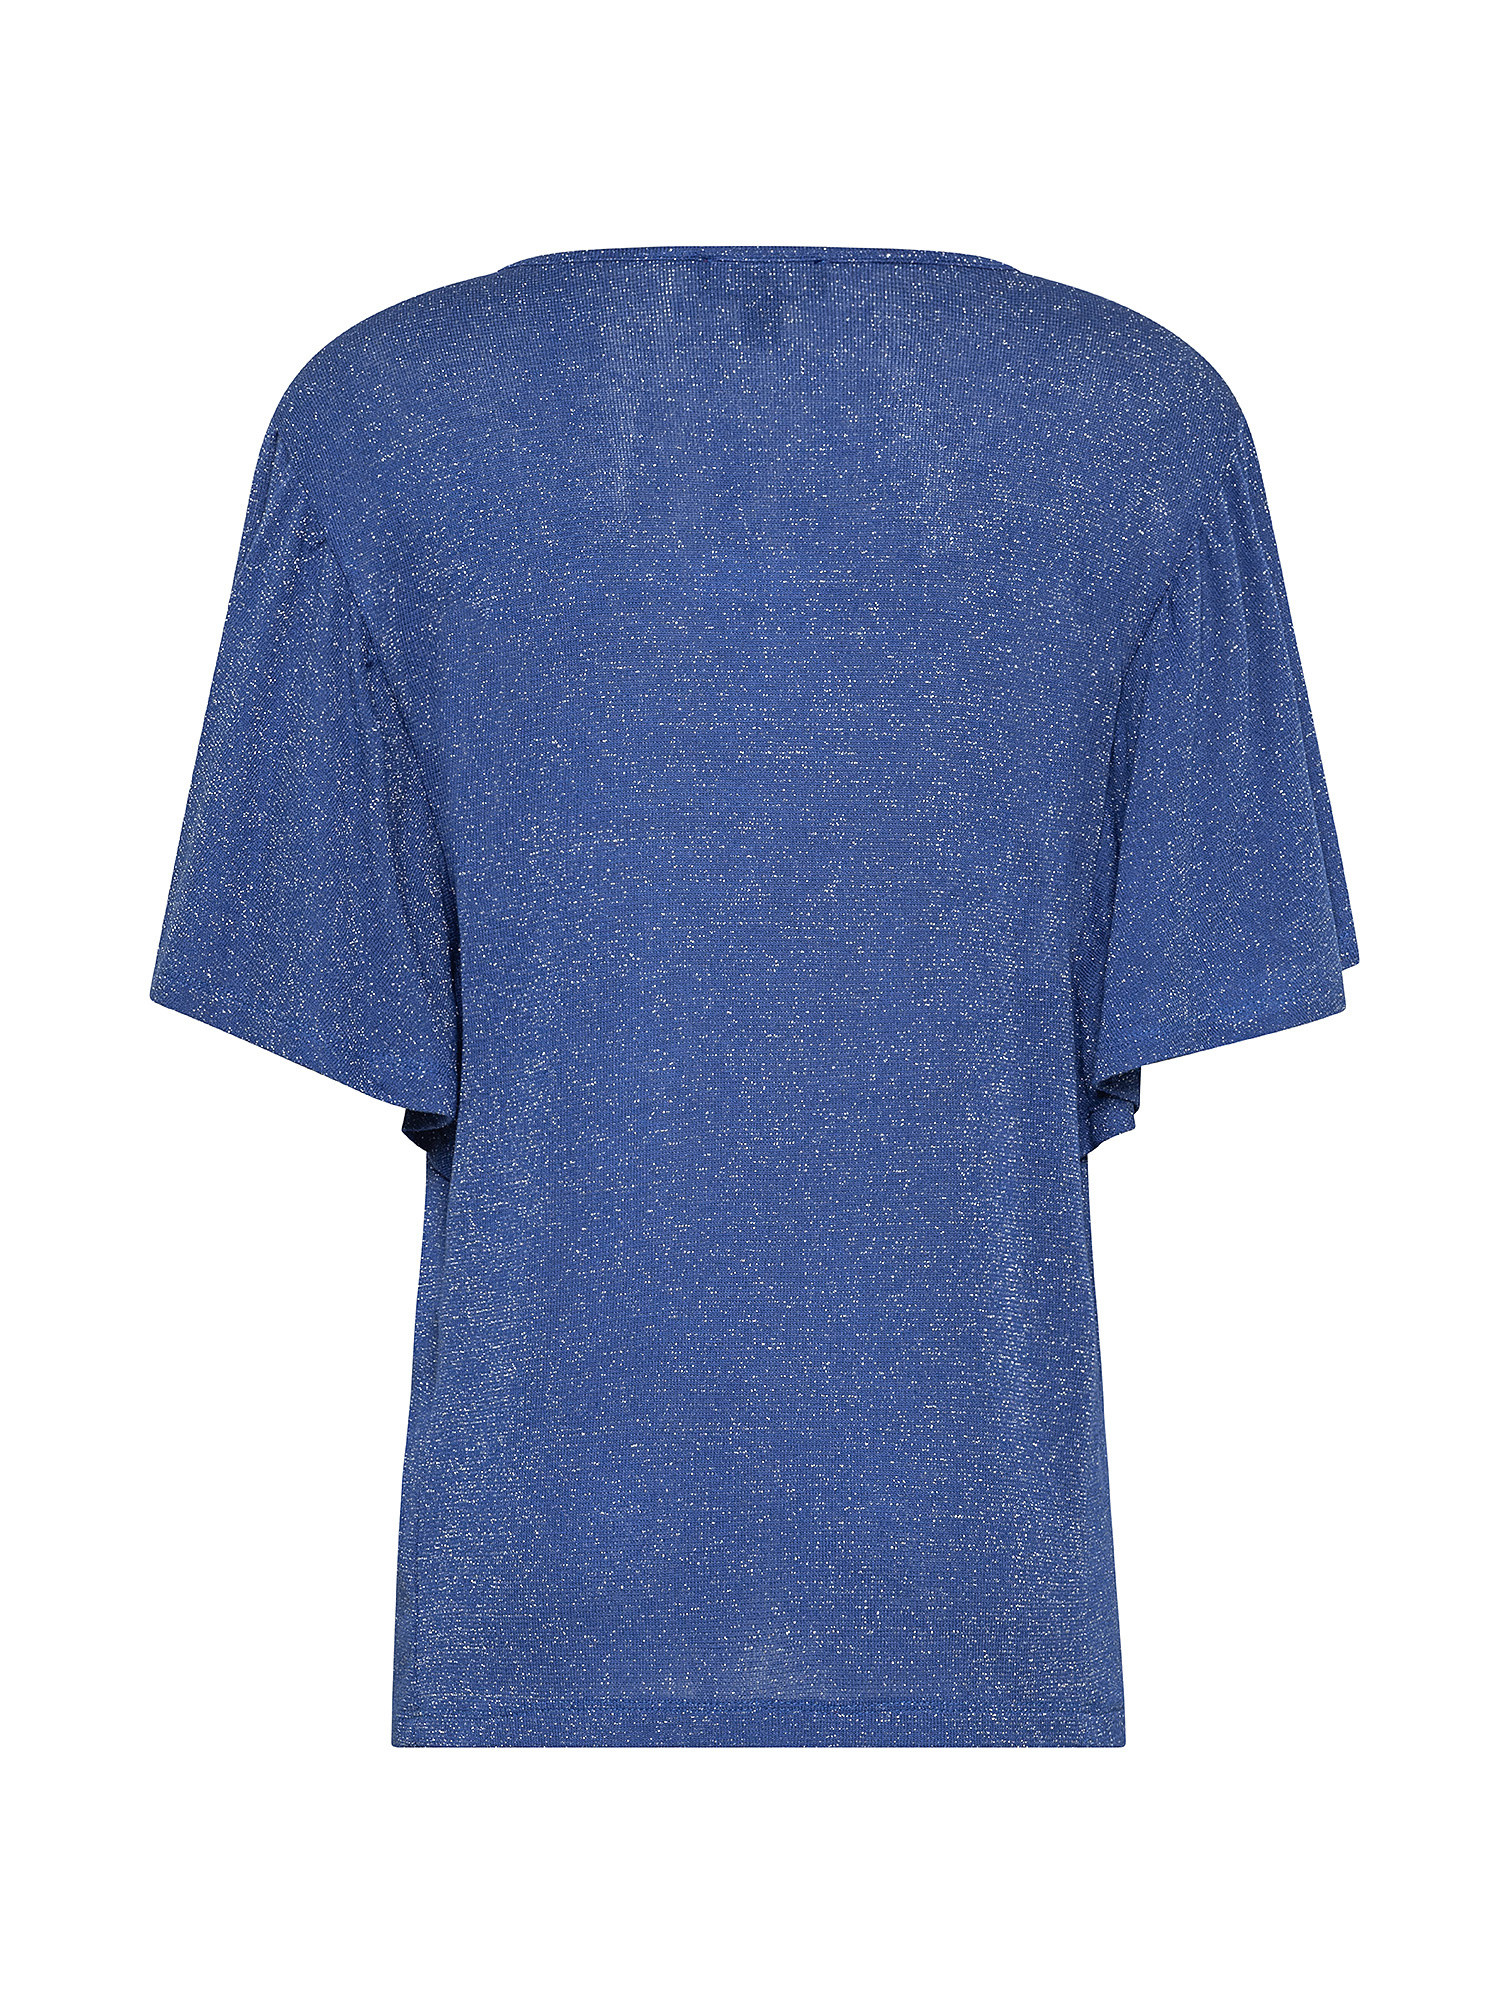 T-shirt con manica a pipistrello, Blu royal, large image number 1